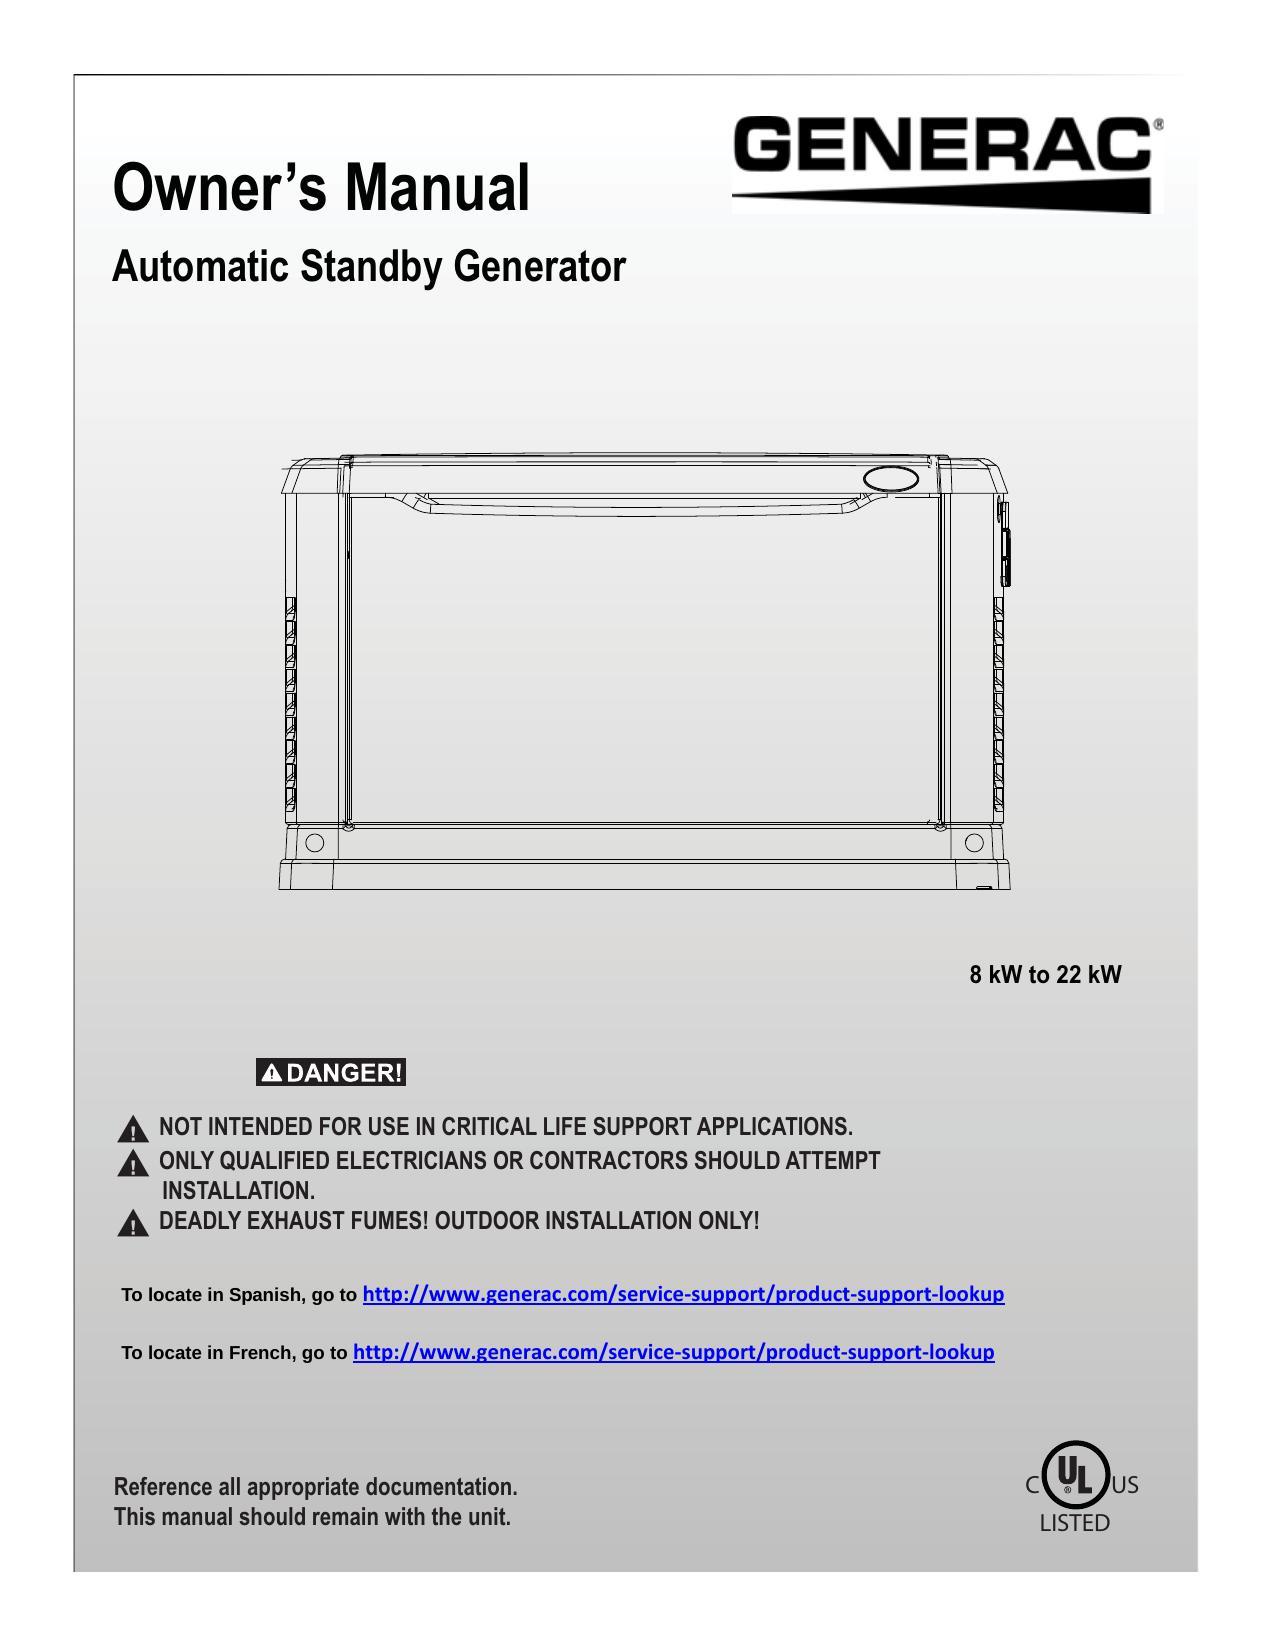 automatic-standby-generator-owners-manual.pdf